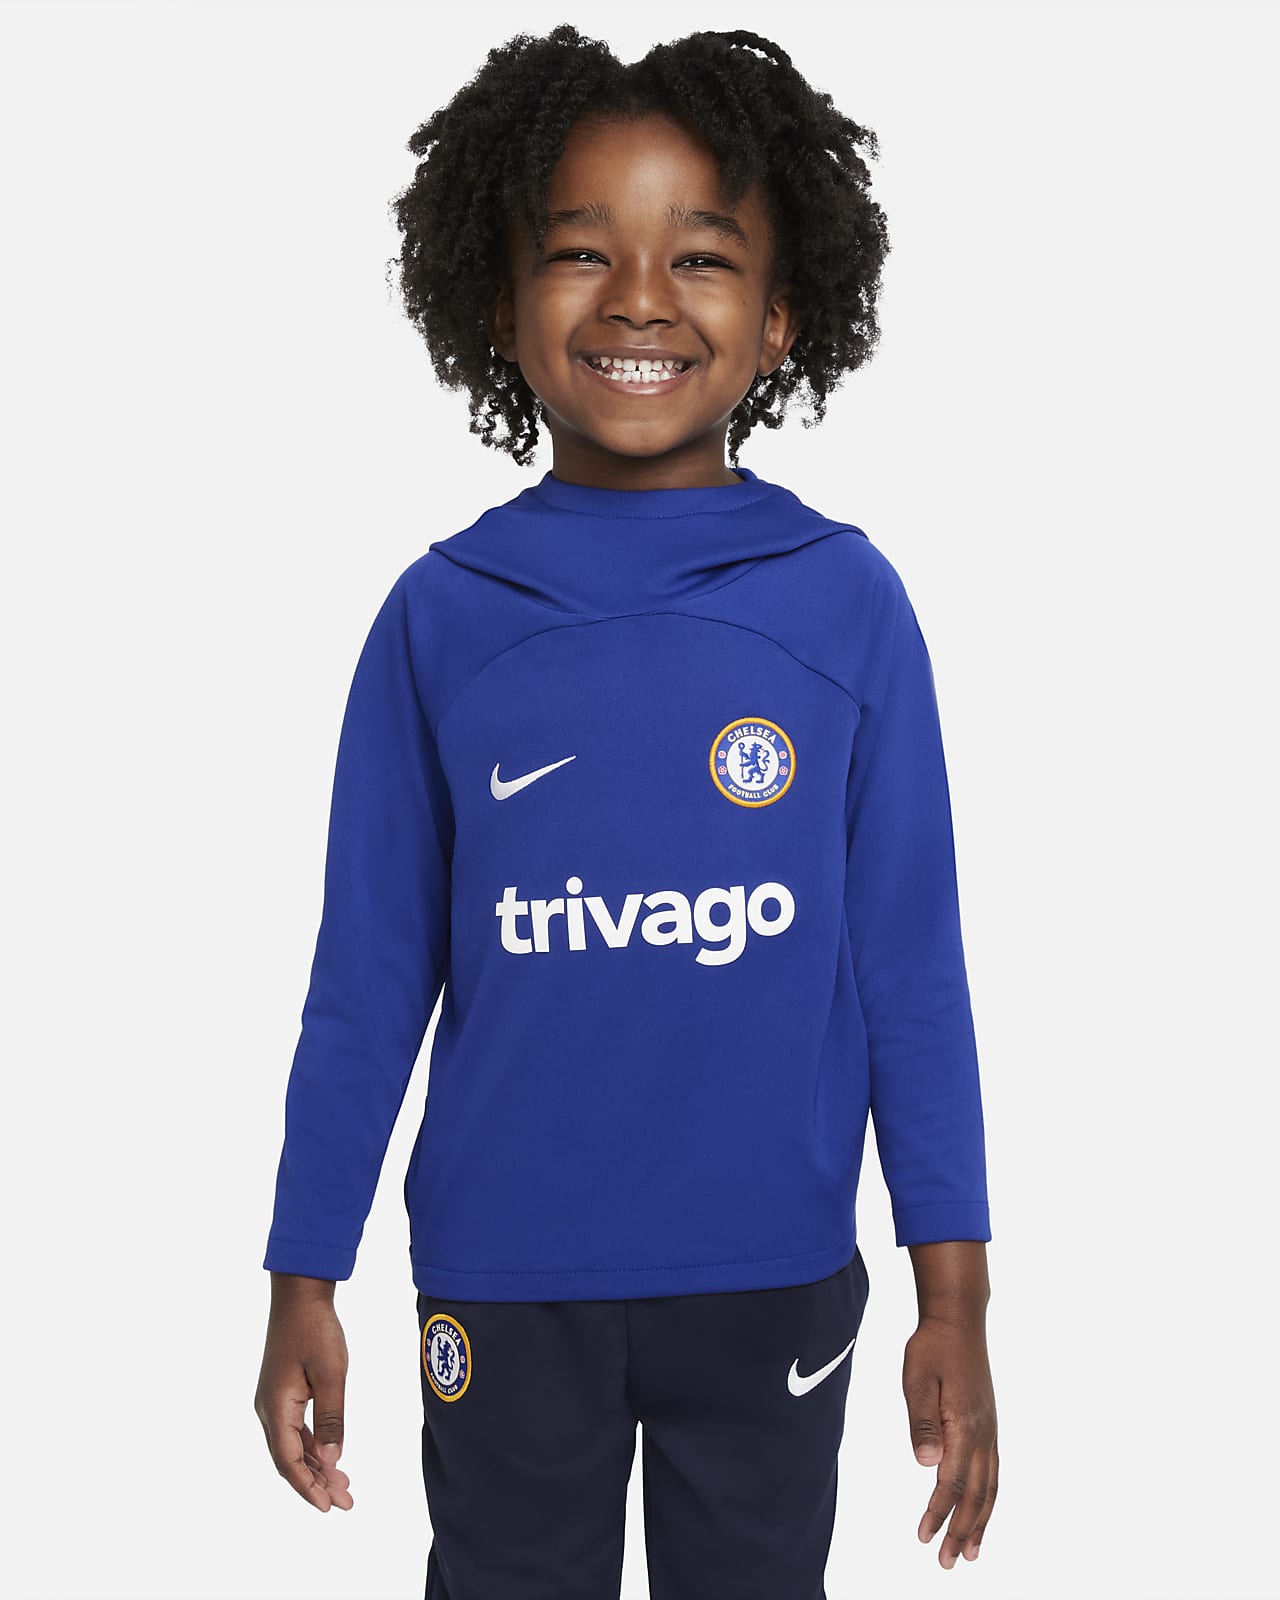 Chelsea Academy Pro Younger Kids' Nike Dri-FIT Football Pullover